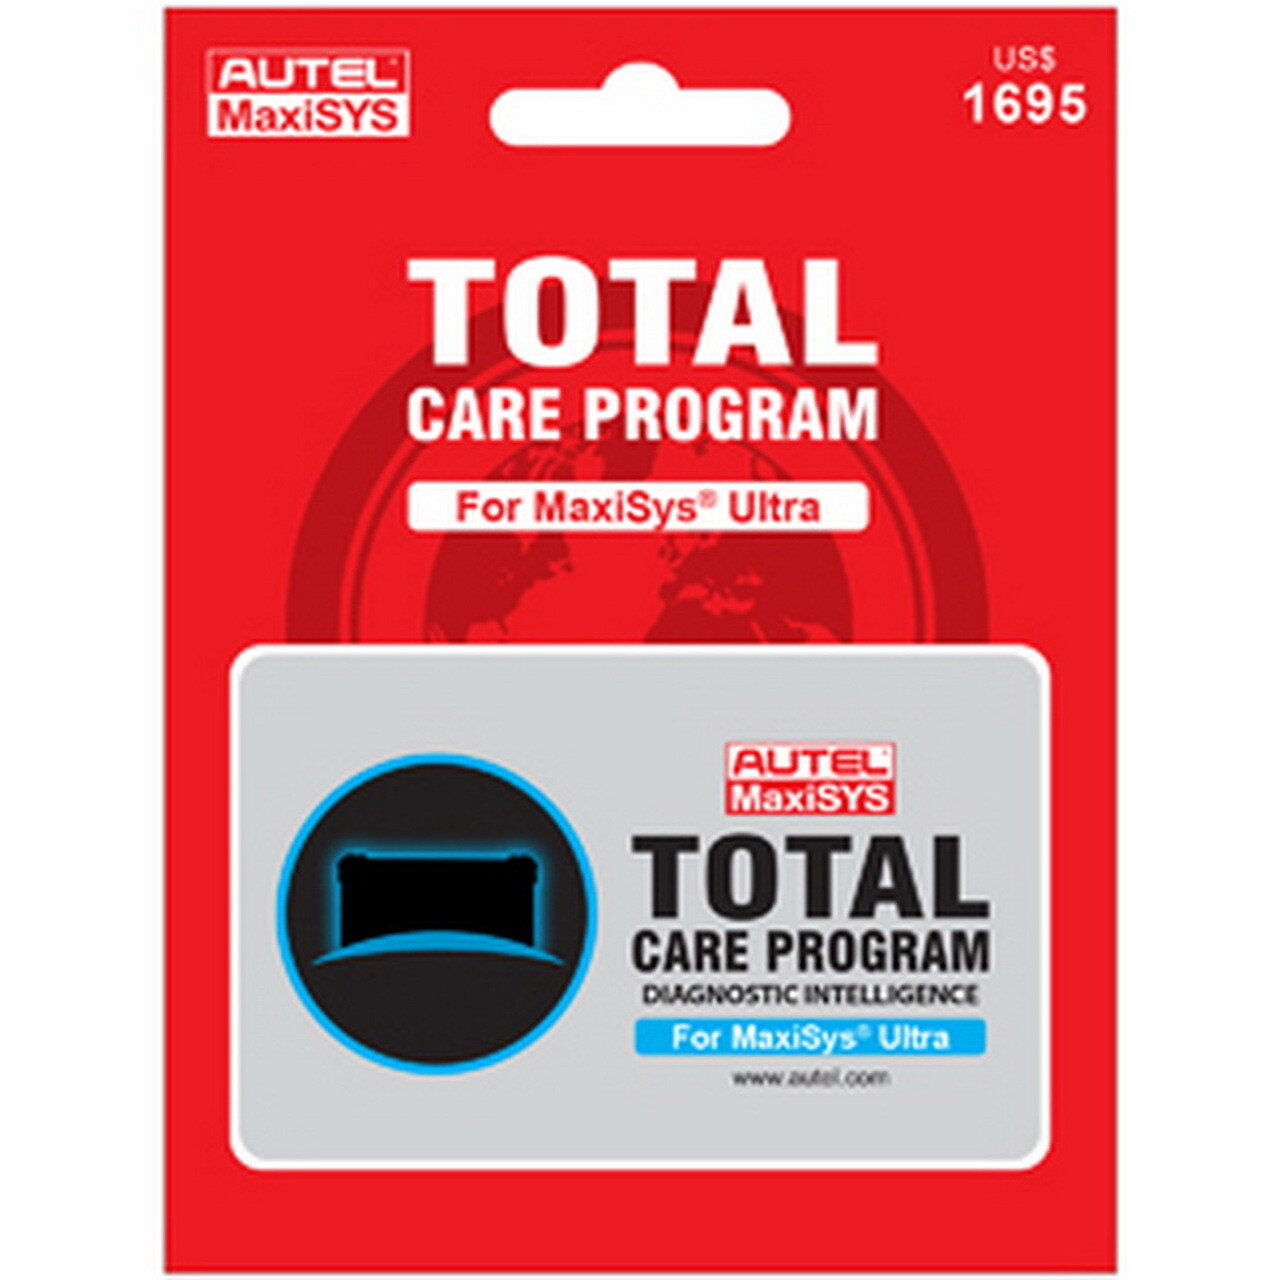 AUTEL USA MSULTRA1YRUPDATE MSULTRA TOTAL CARE AND UPDATE PROGRAM FOR MAXISYS ULTRA